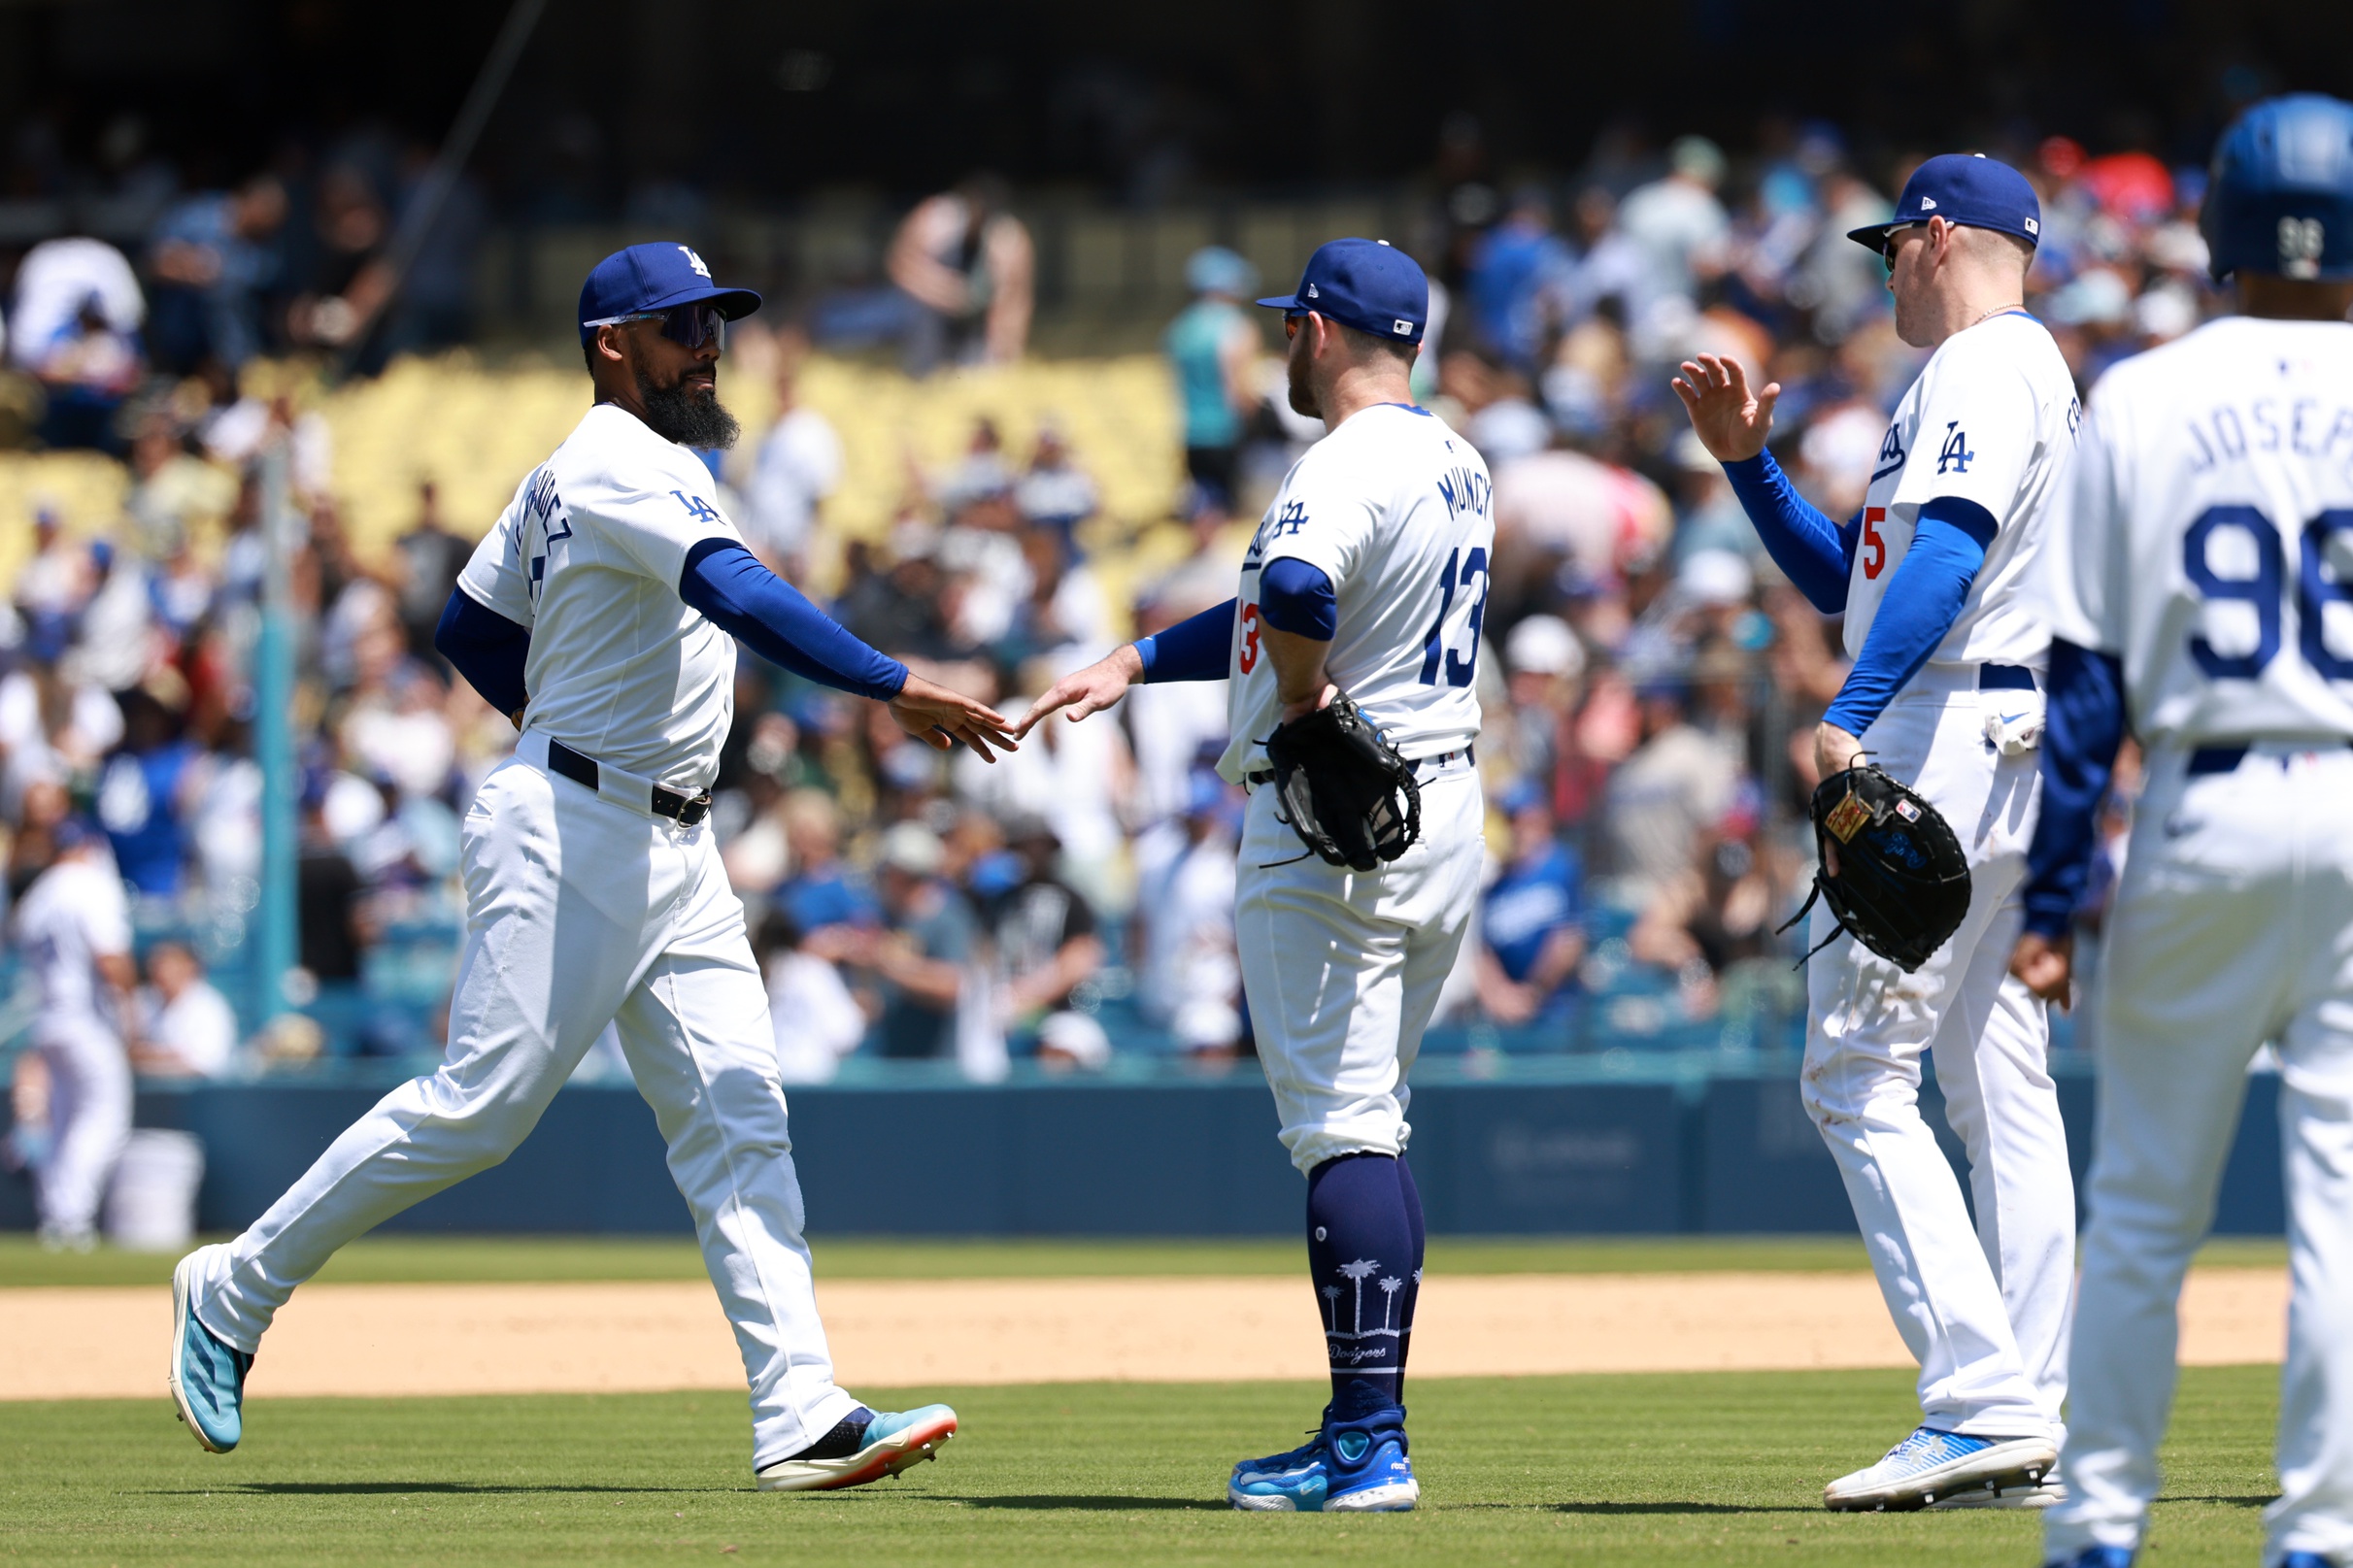 Dodgers Star Leading MLB in Doubles This Season